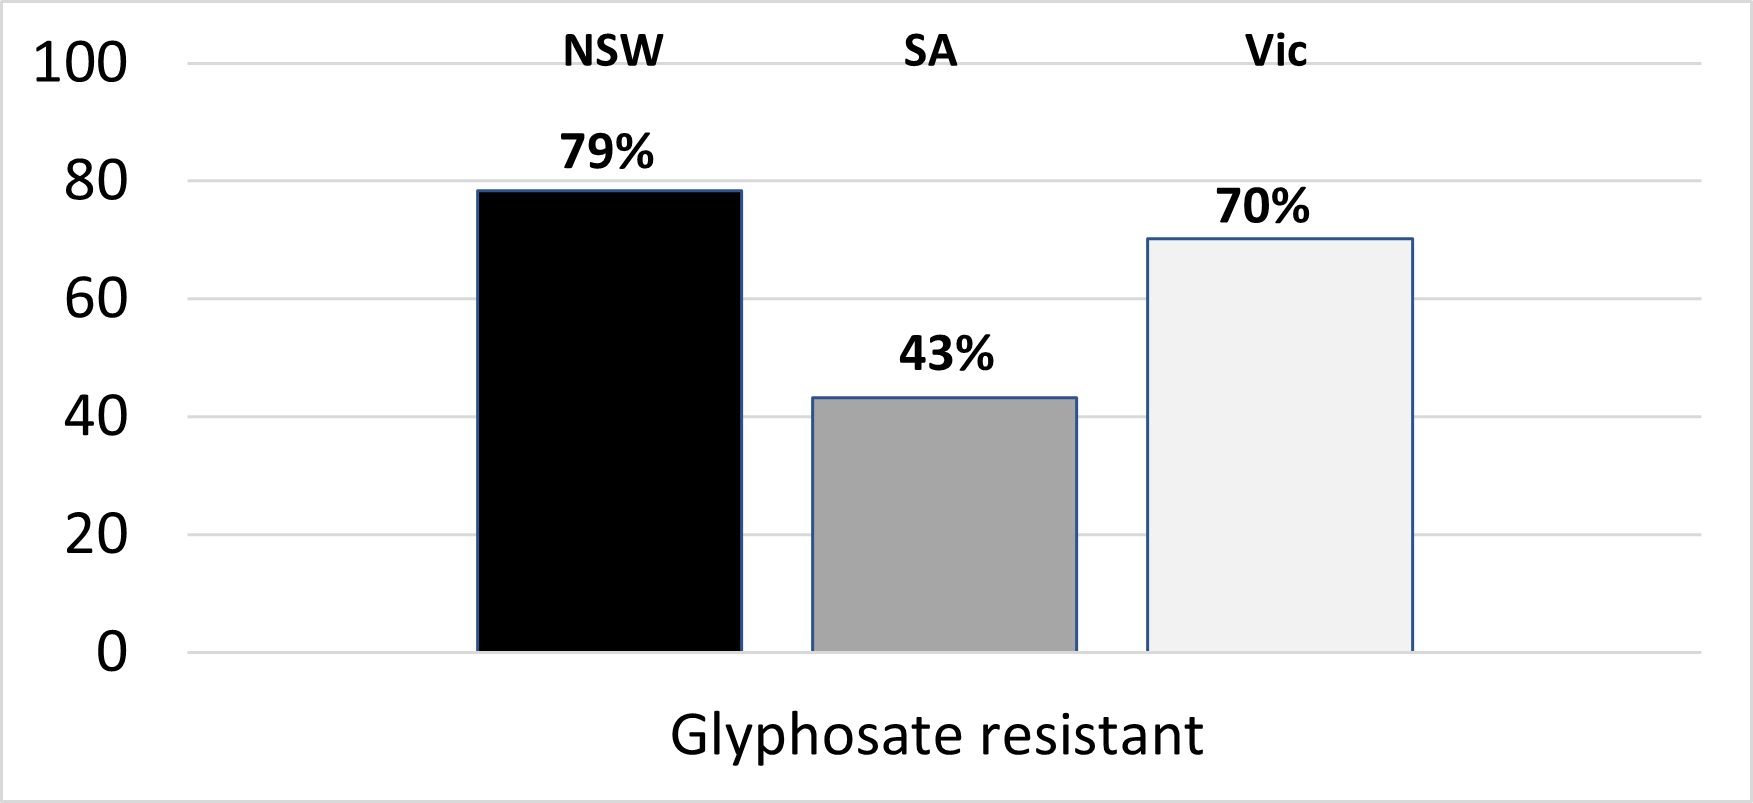 This column graph shows the percent (%) resistance to glyphosate confirmed in farmer ryegrass samples originating from 83 NSW, 37 SA and 74 Vic cropping paddocks treated with glyphosate in autumn 2020. Testing conducted by Plant Science Consulting using the Quick-Test.